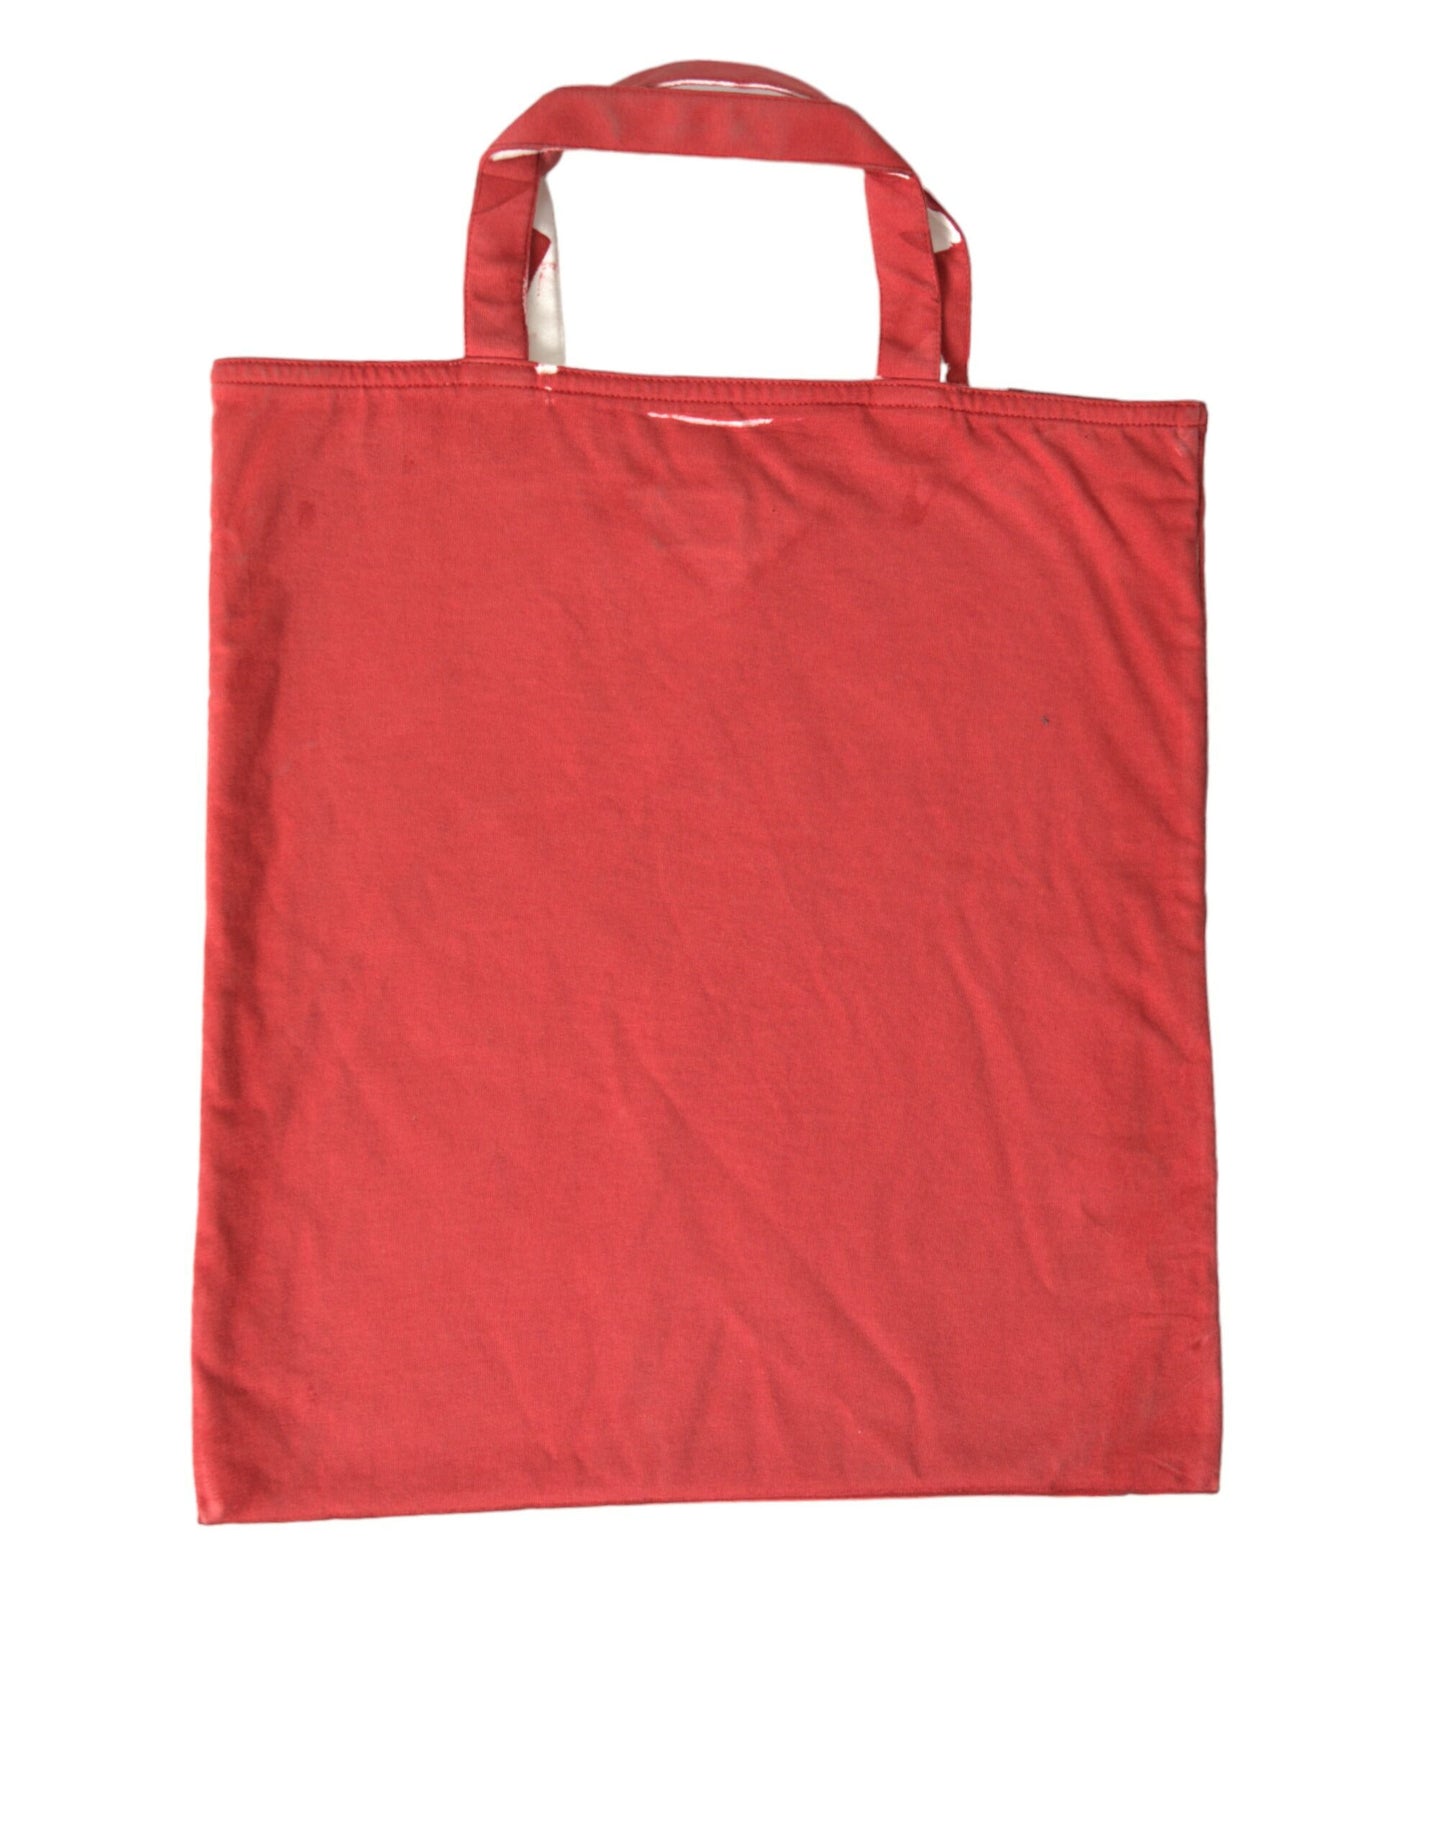 Chic Red and White Fabric Tote Bag